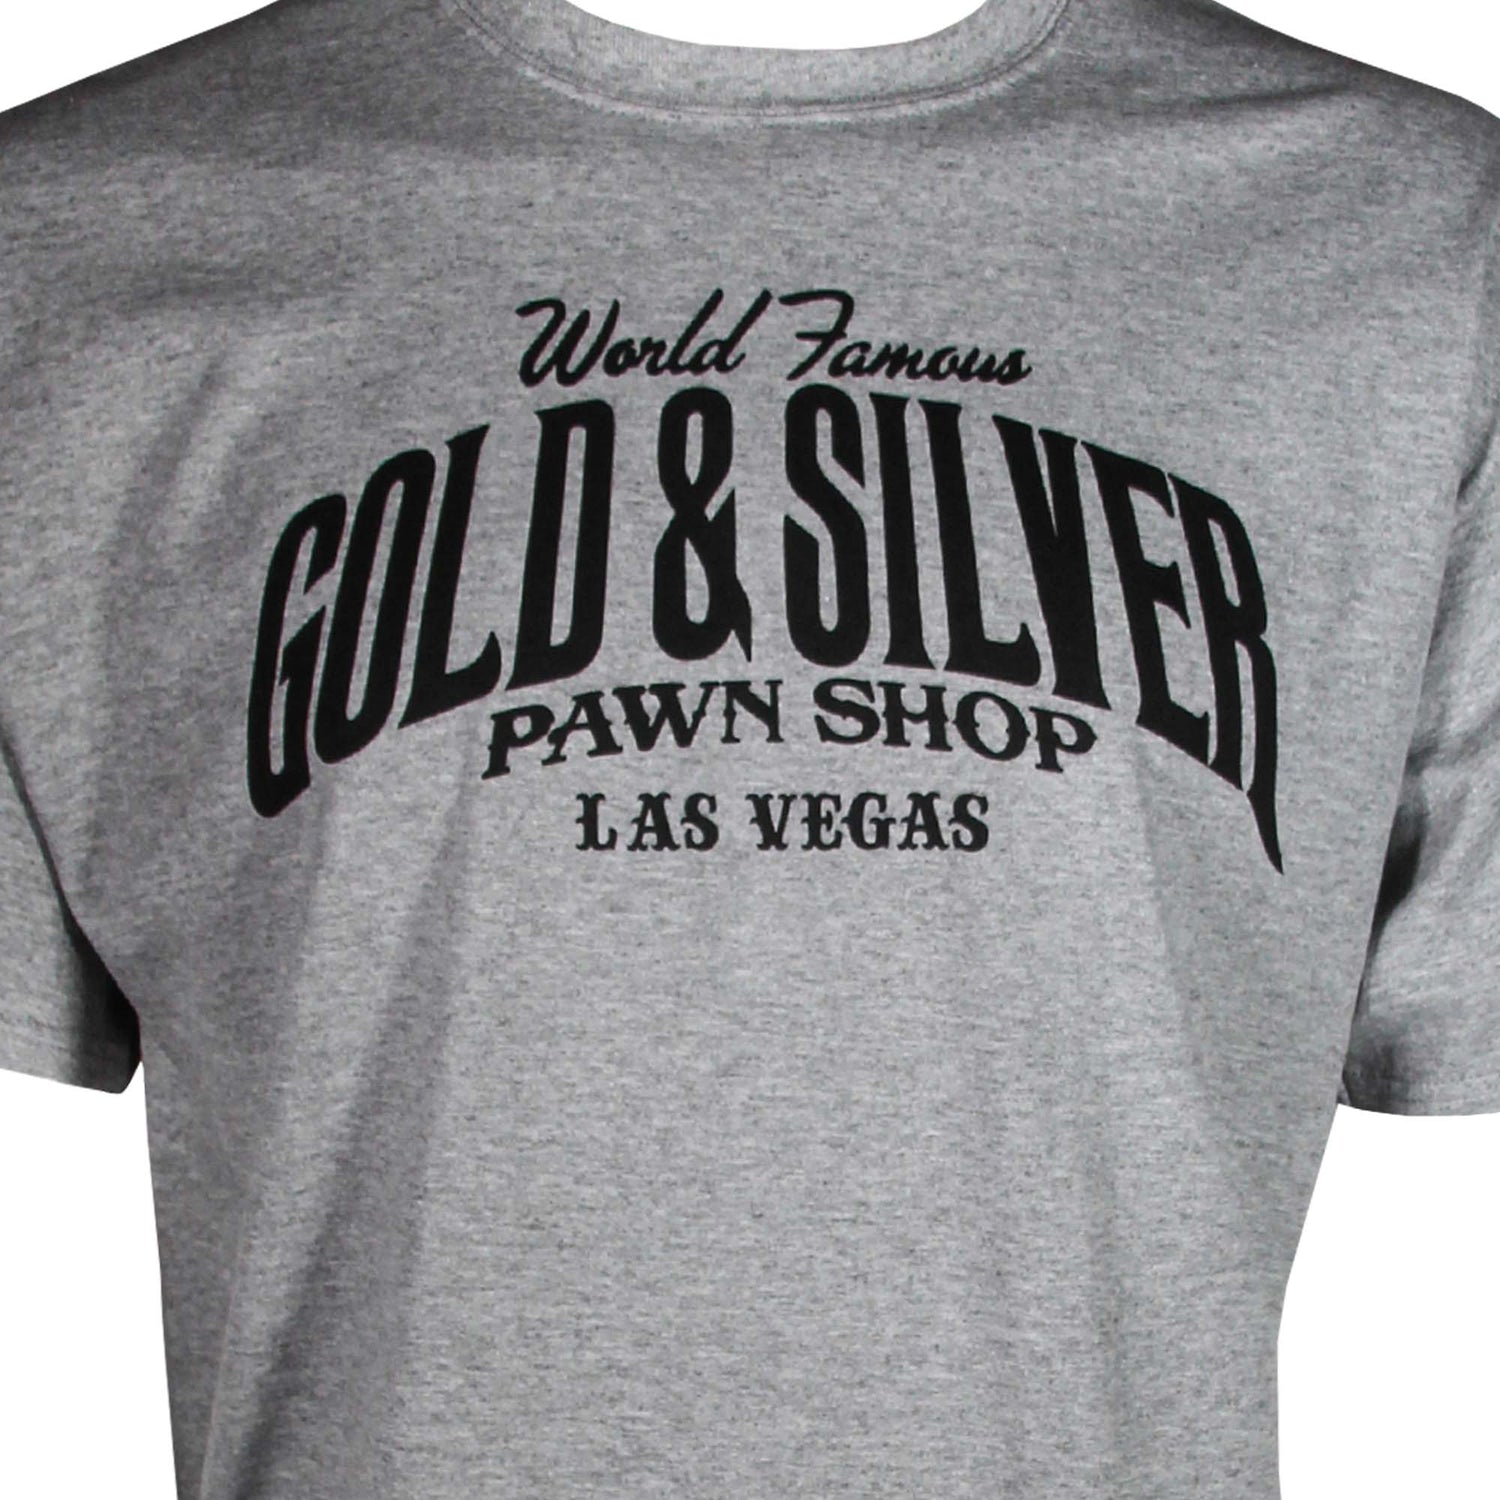 Gold & Silver Pawn Shop Round Neck Basic Short Sleeve T-Shirt Five